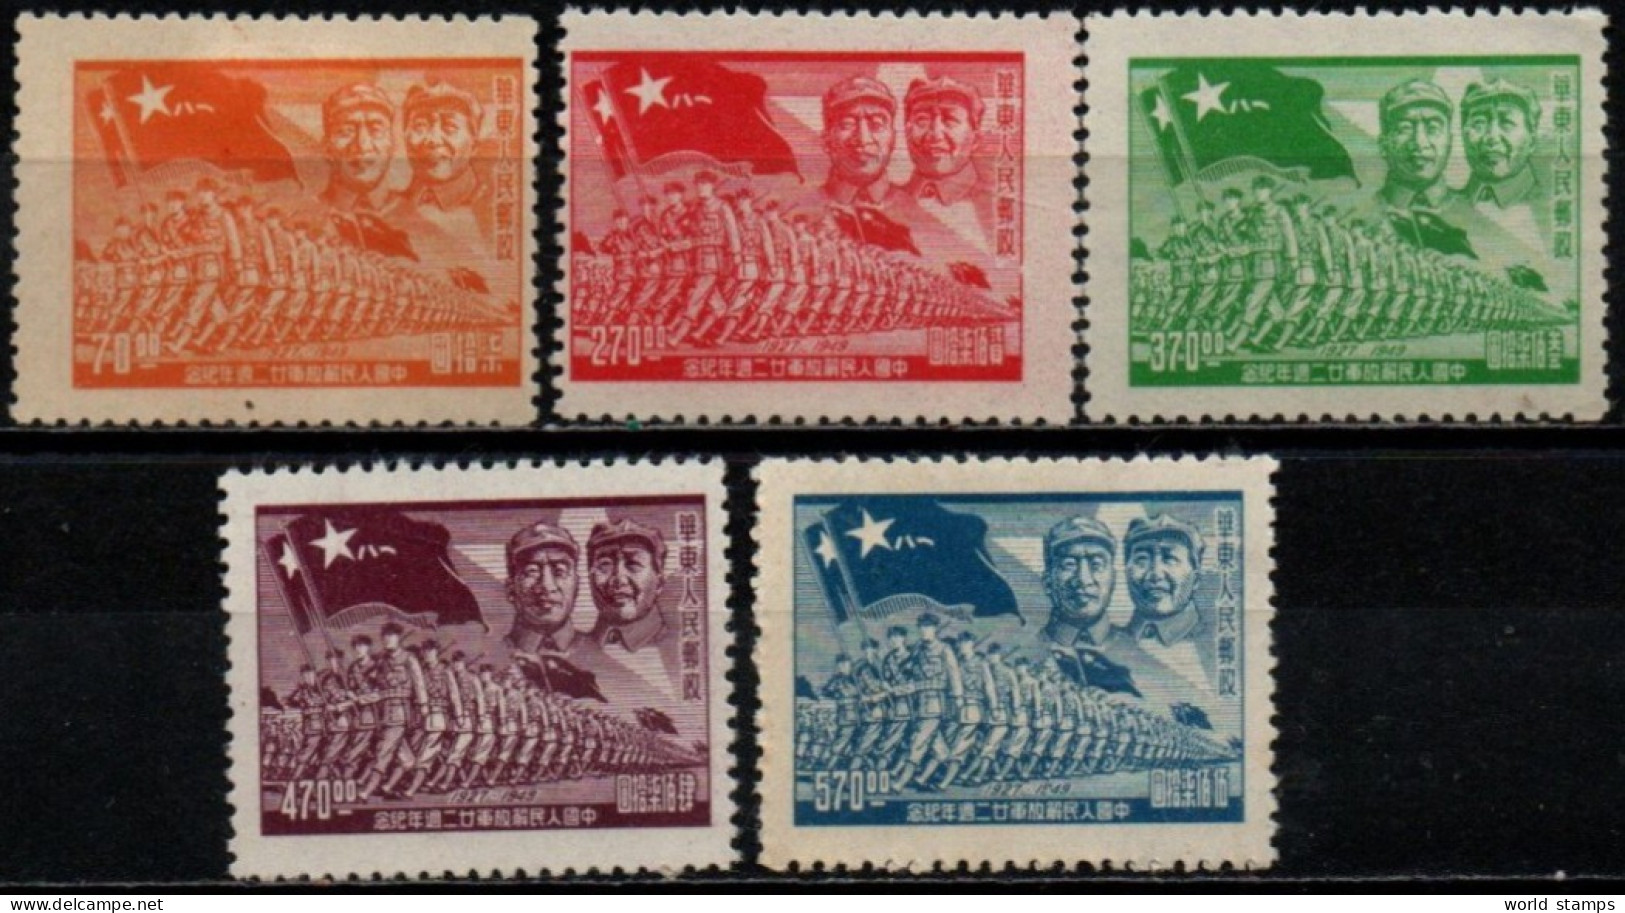 CHINE ORIENTALE 1949 SANS GOMME - Western-China 1949-50